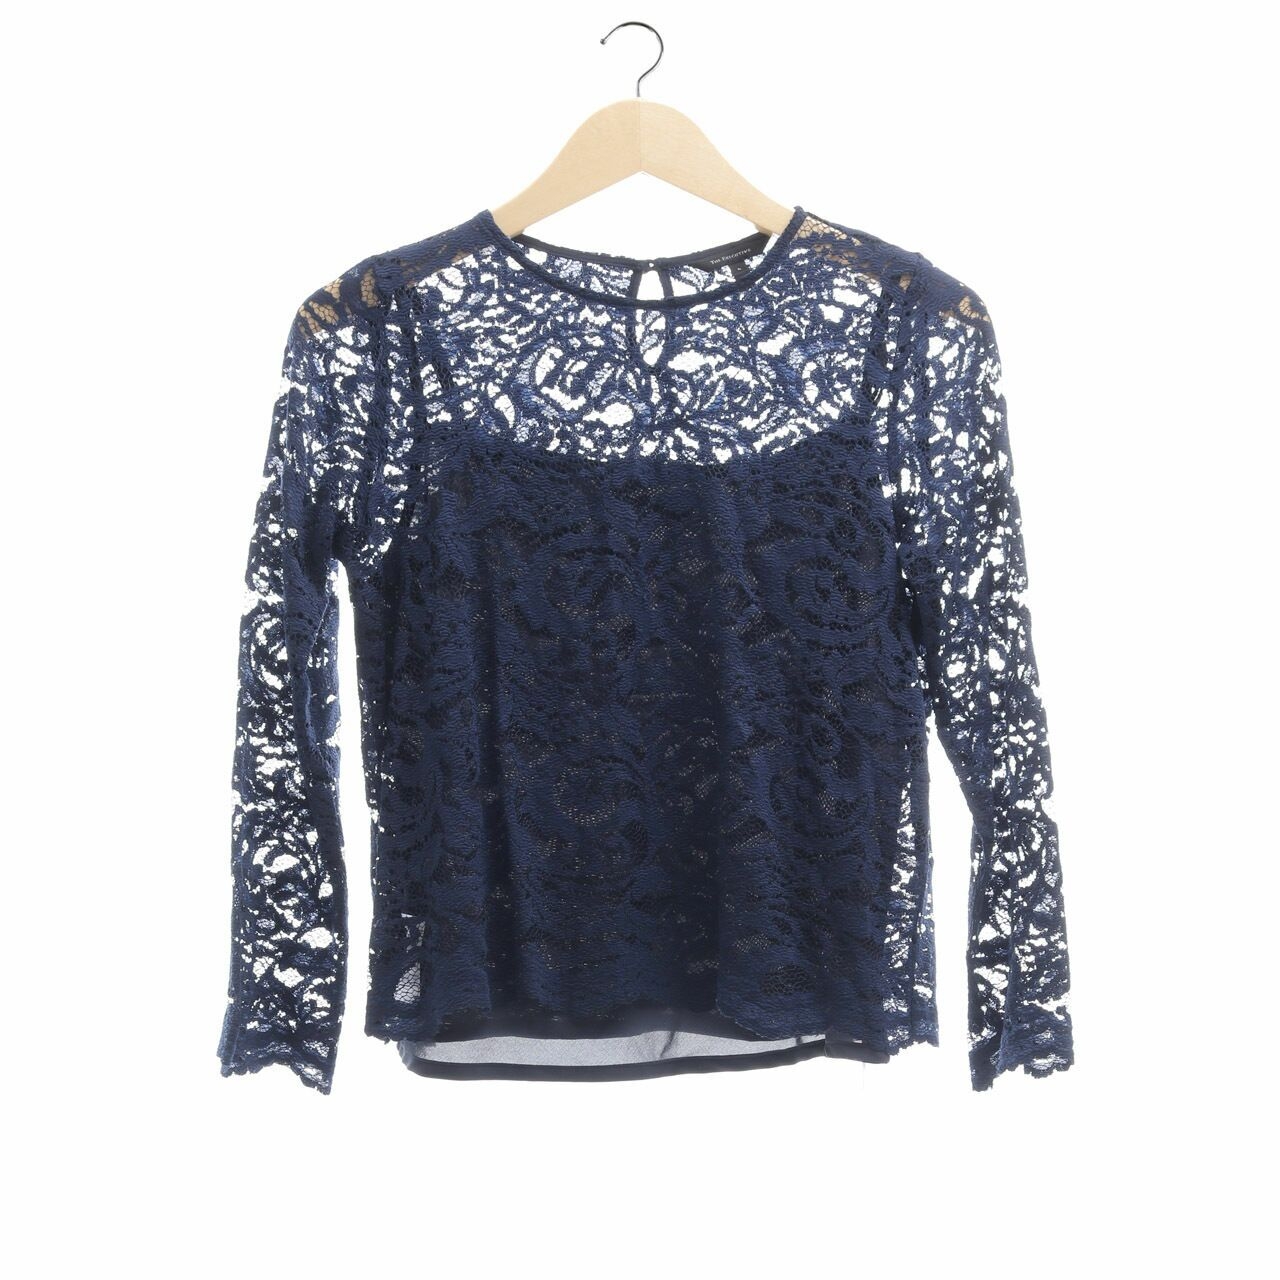 The Executive Navy Lace Blouse